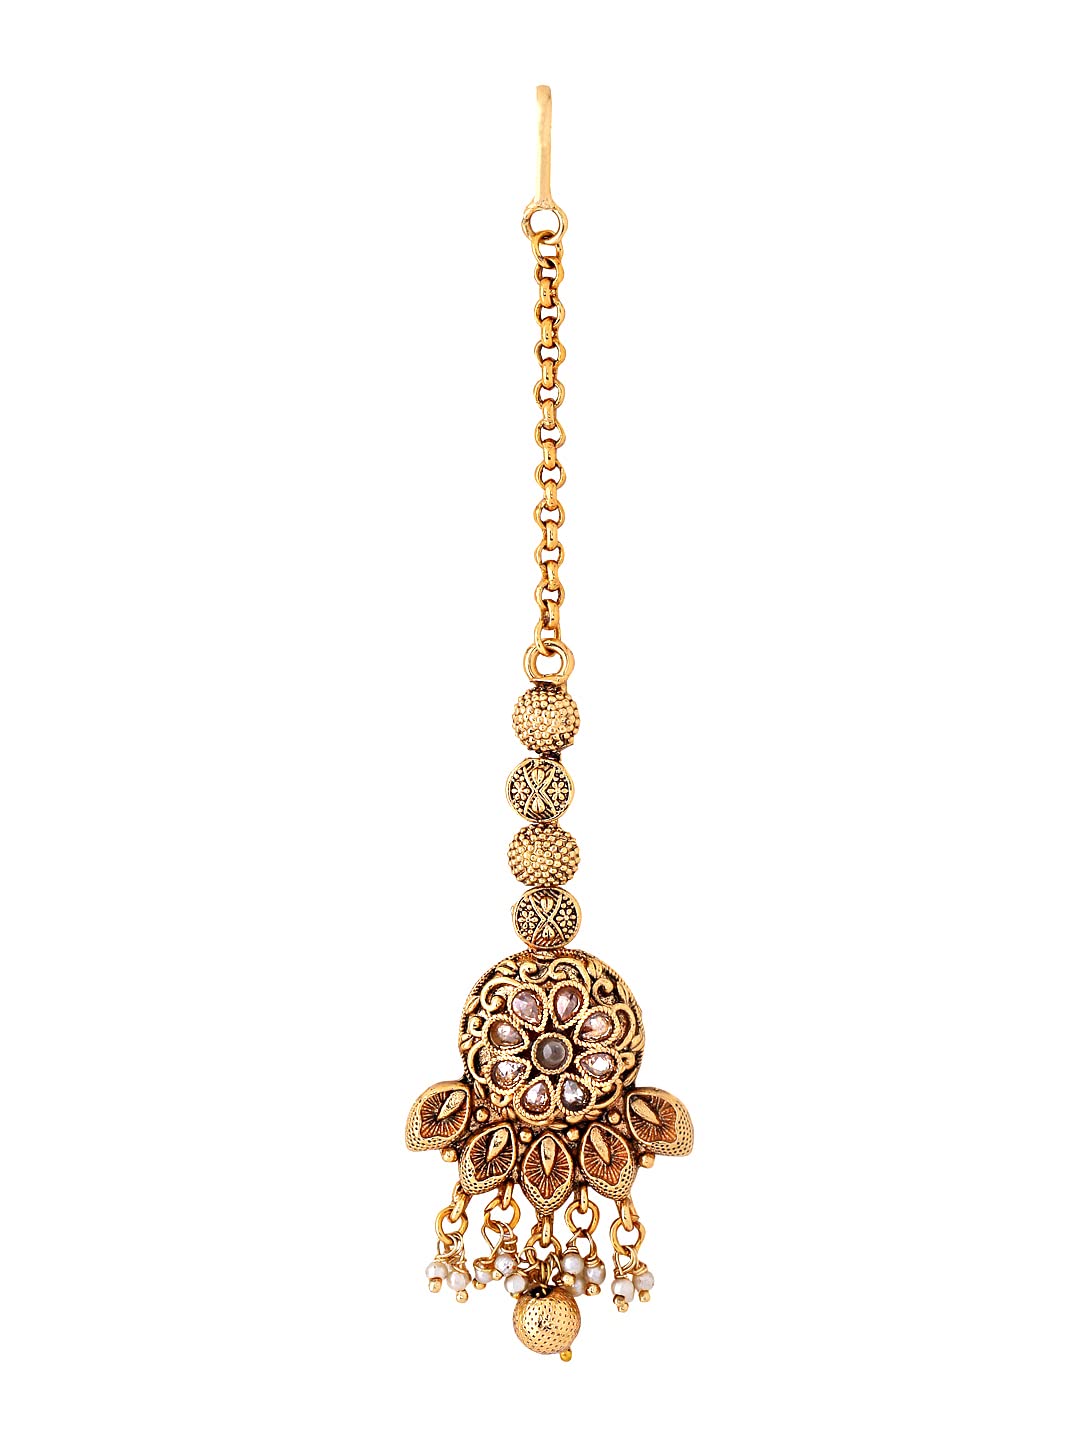 Yellow Chimes Manng Tikka for Women Gold Toned Crystal Studded Beads Drop Maang Tikka for Women and Girls